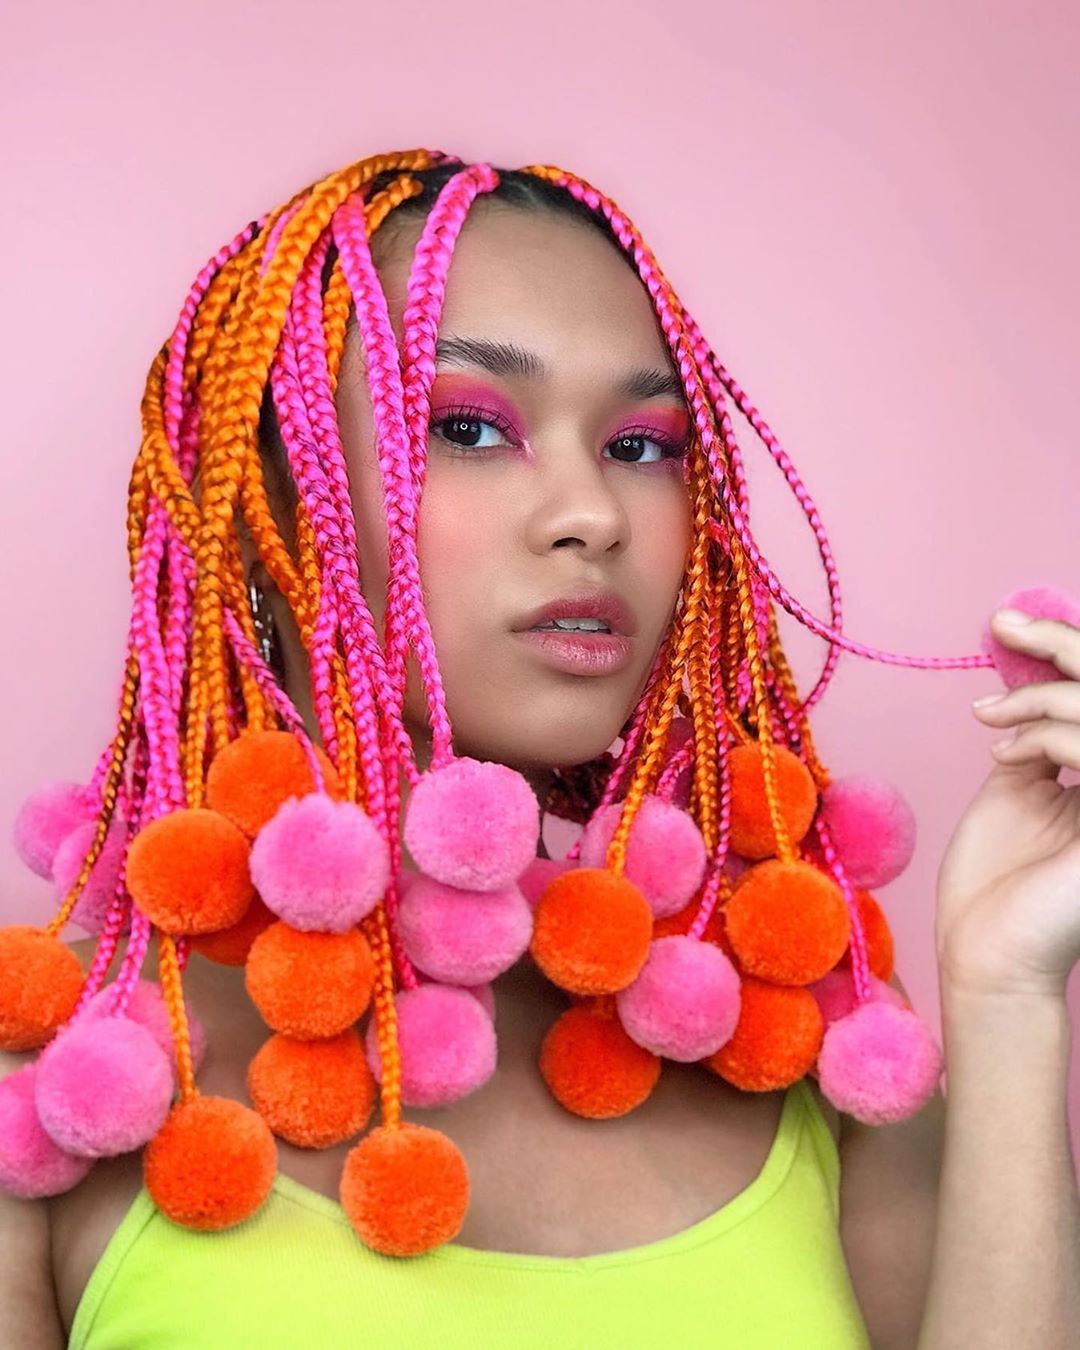 Minnie Style - @yusya_kapustina’s hairstyle got Minnie on the dot 🧡💖 Celebrate #NationalHairDay by heading to our Story for more Minnie-inspired hairstyles!